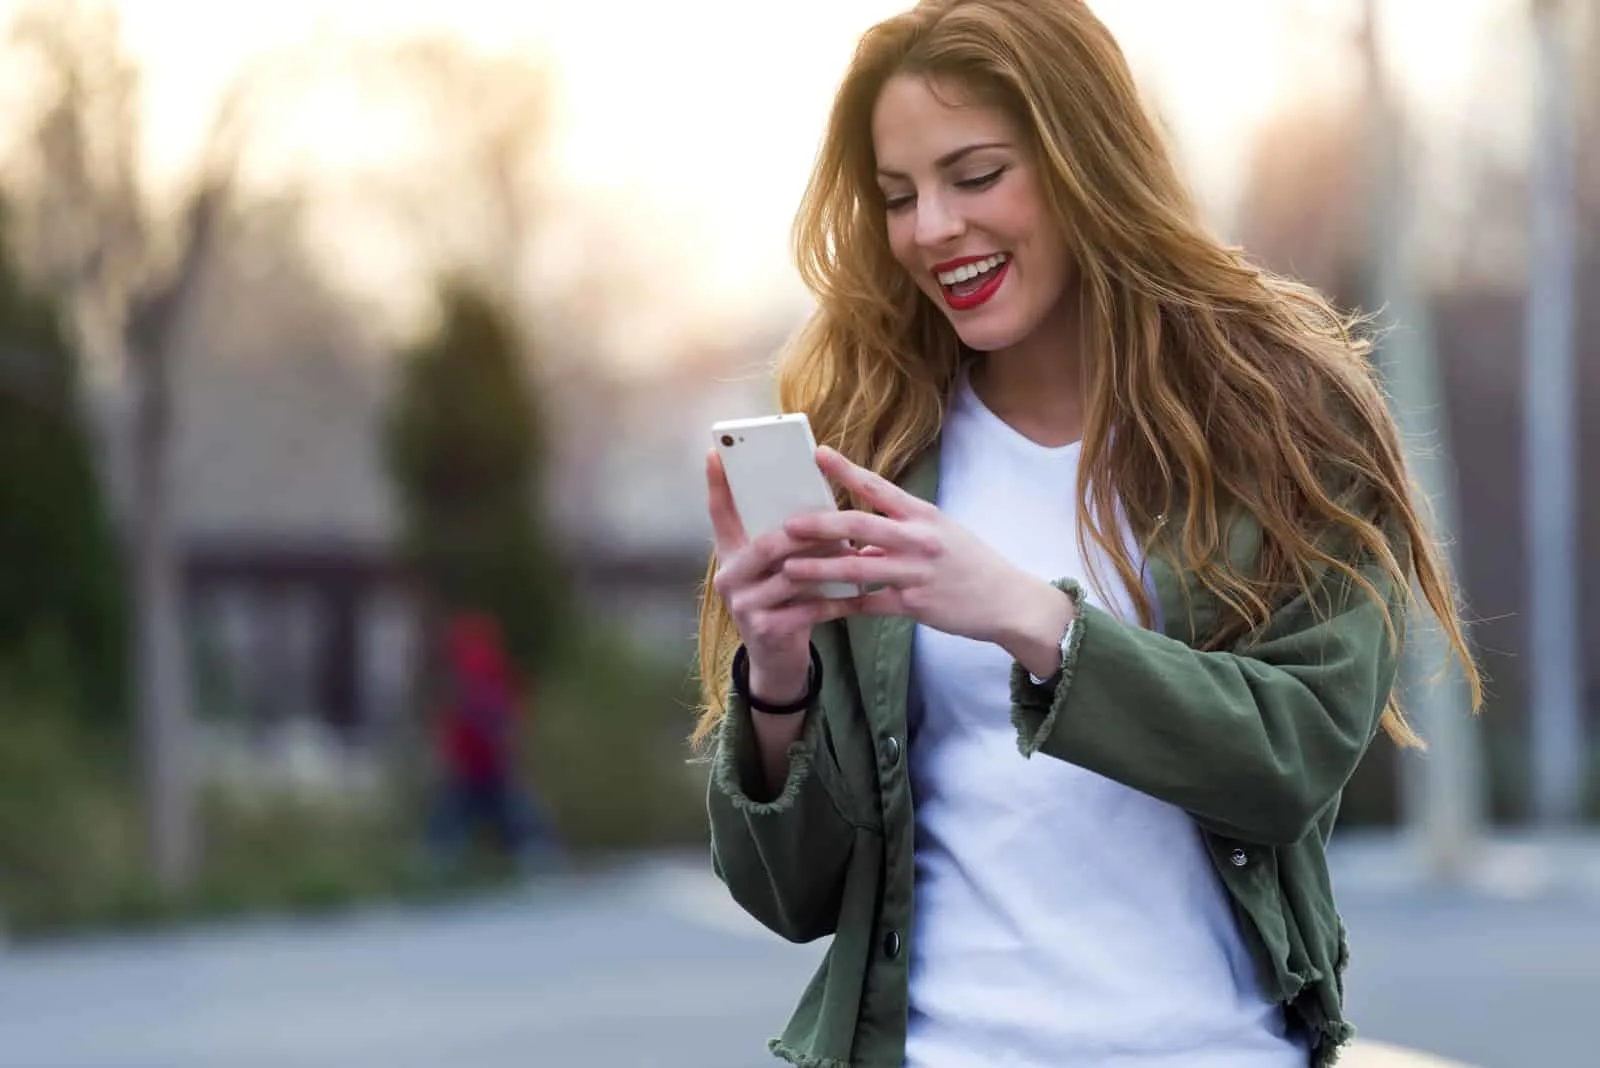 a smiling woman with long brown hair walks down the street and buttons on the phone